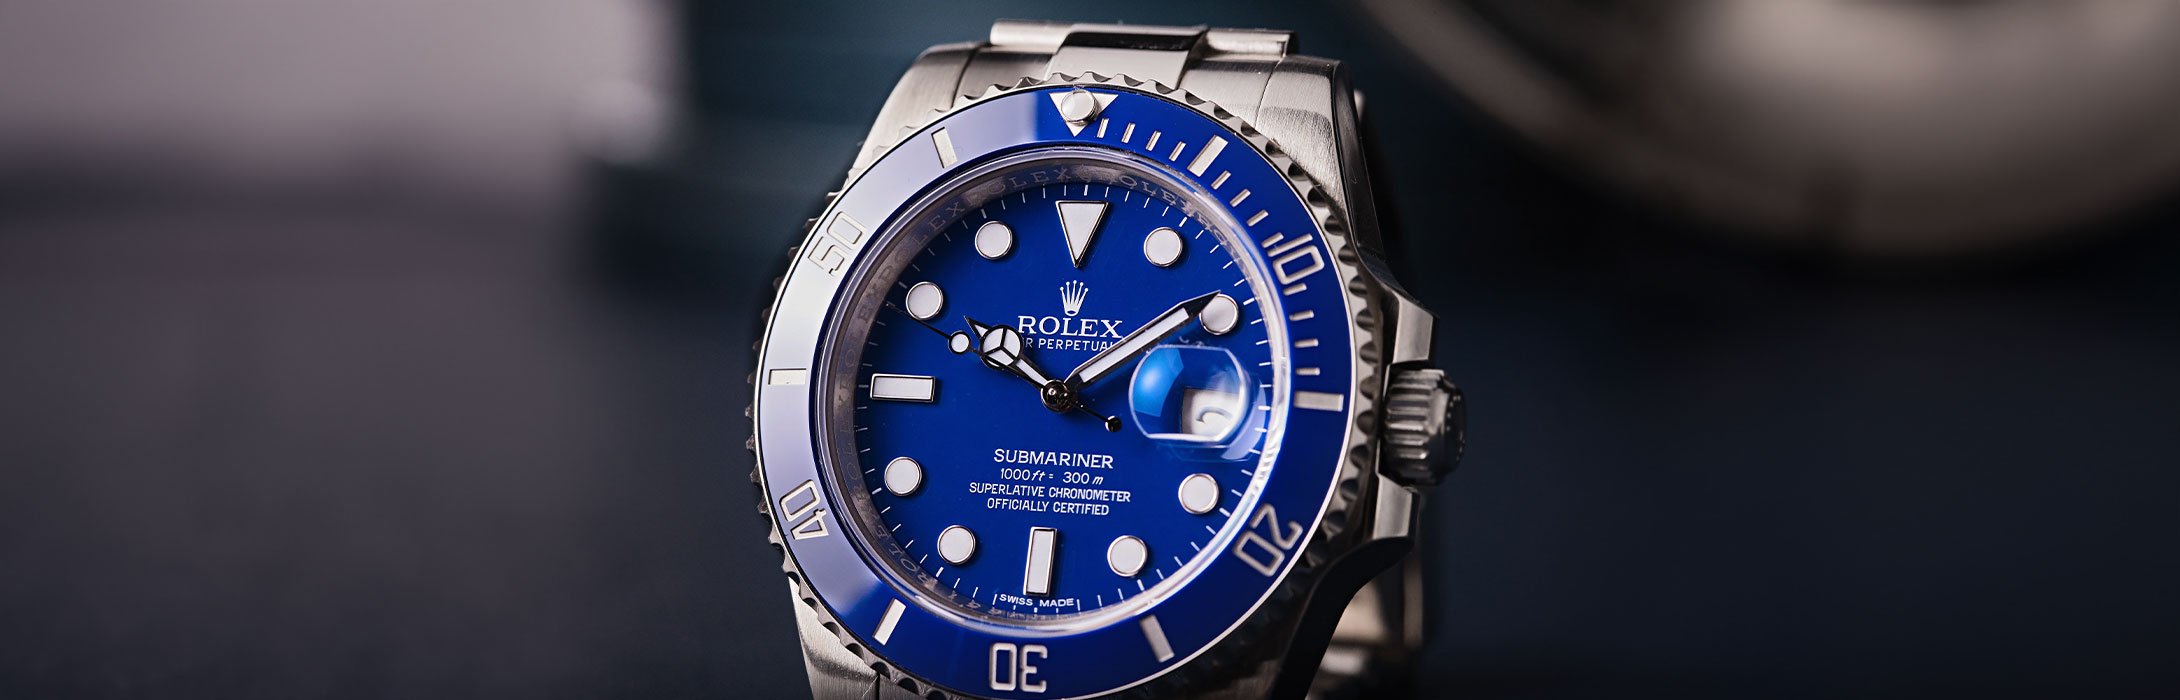 How to Spot a Fake Rolex: The Official Guide - BobsWatches.com